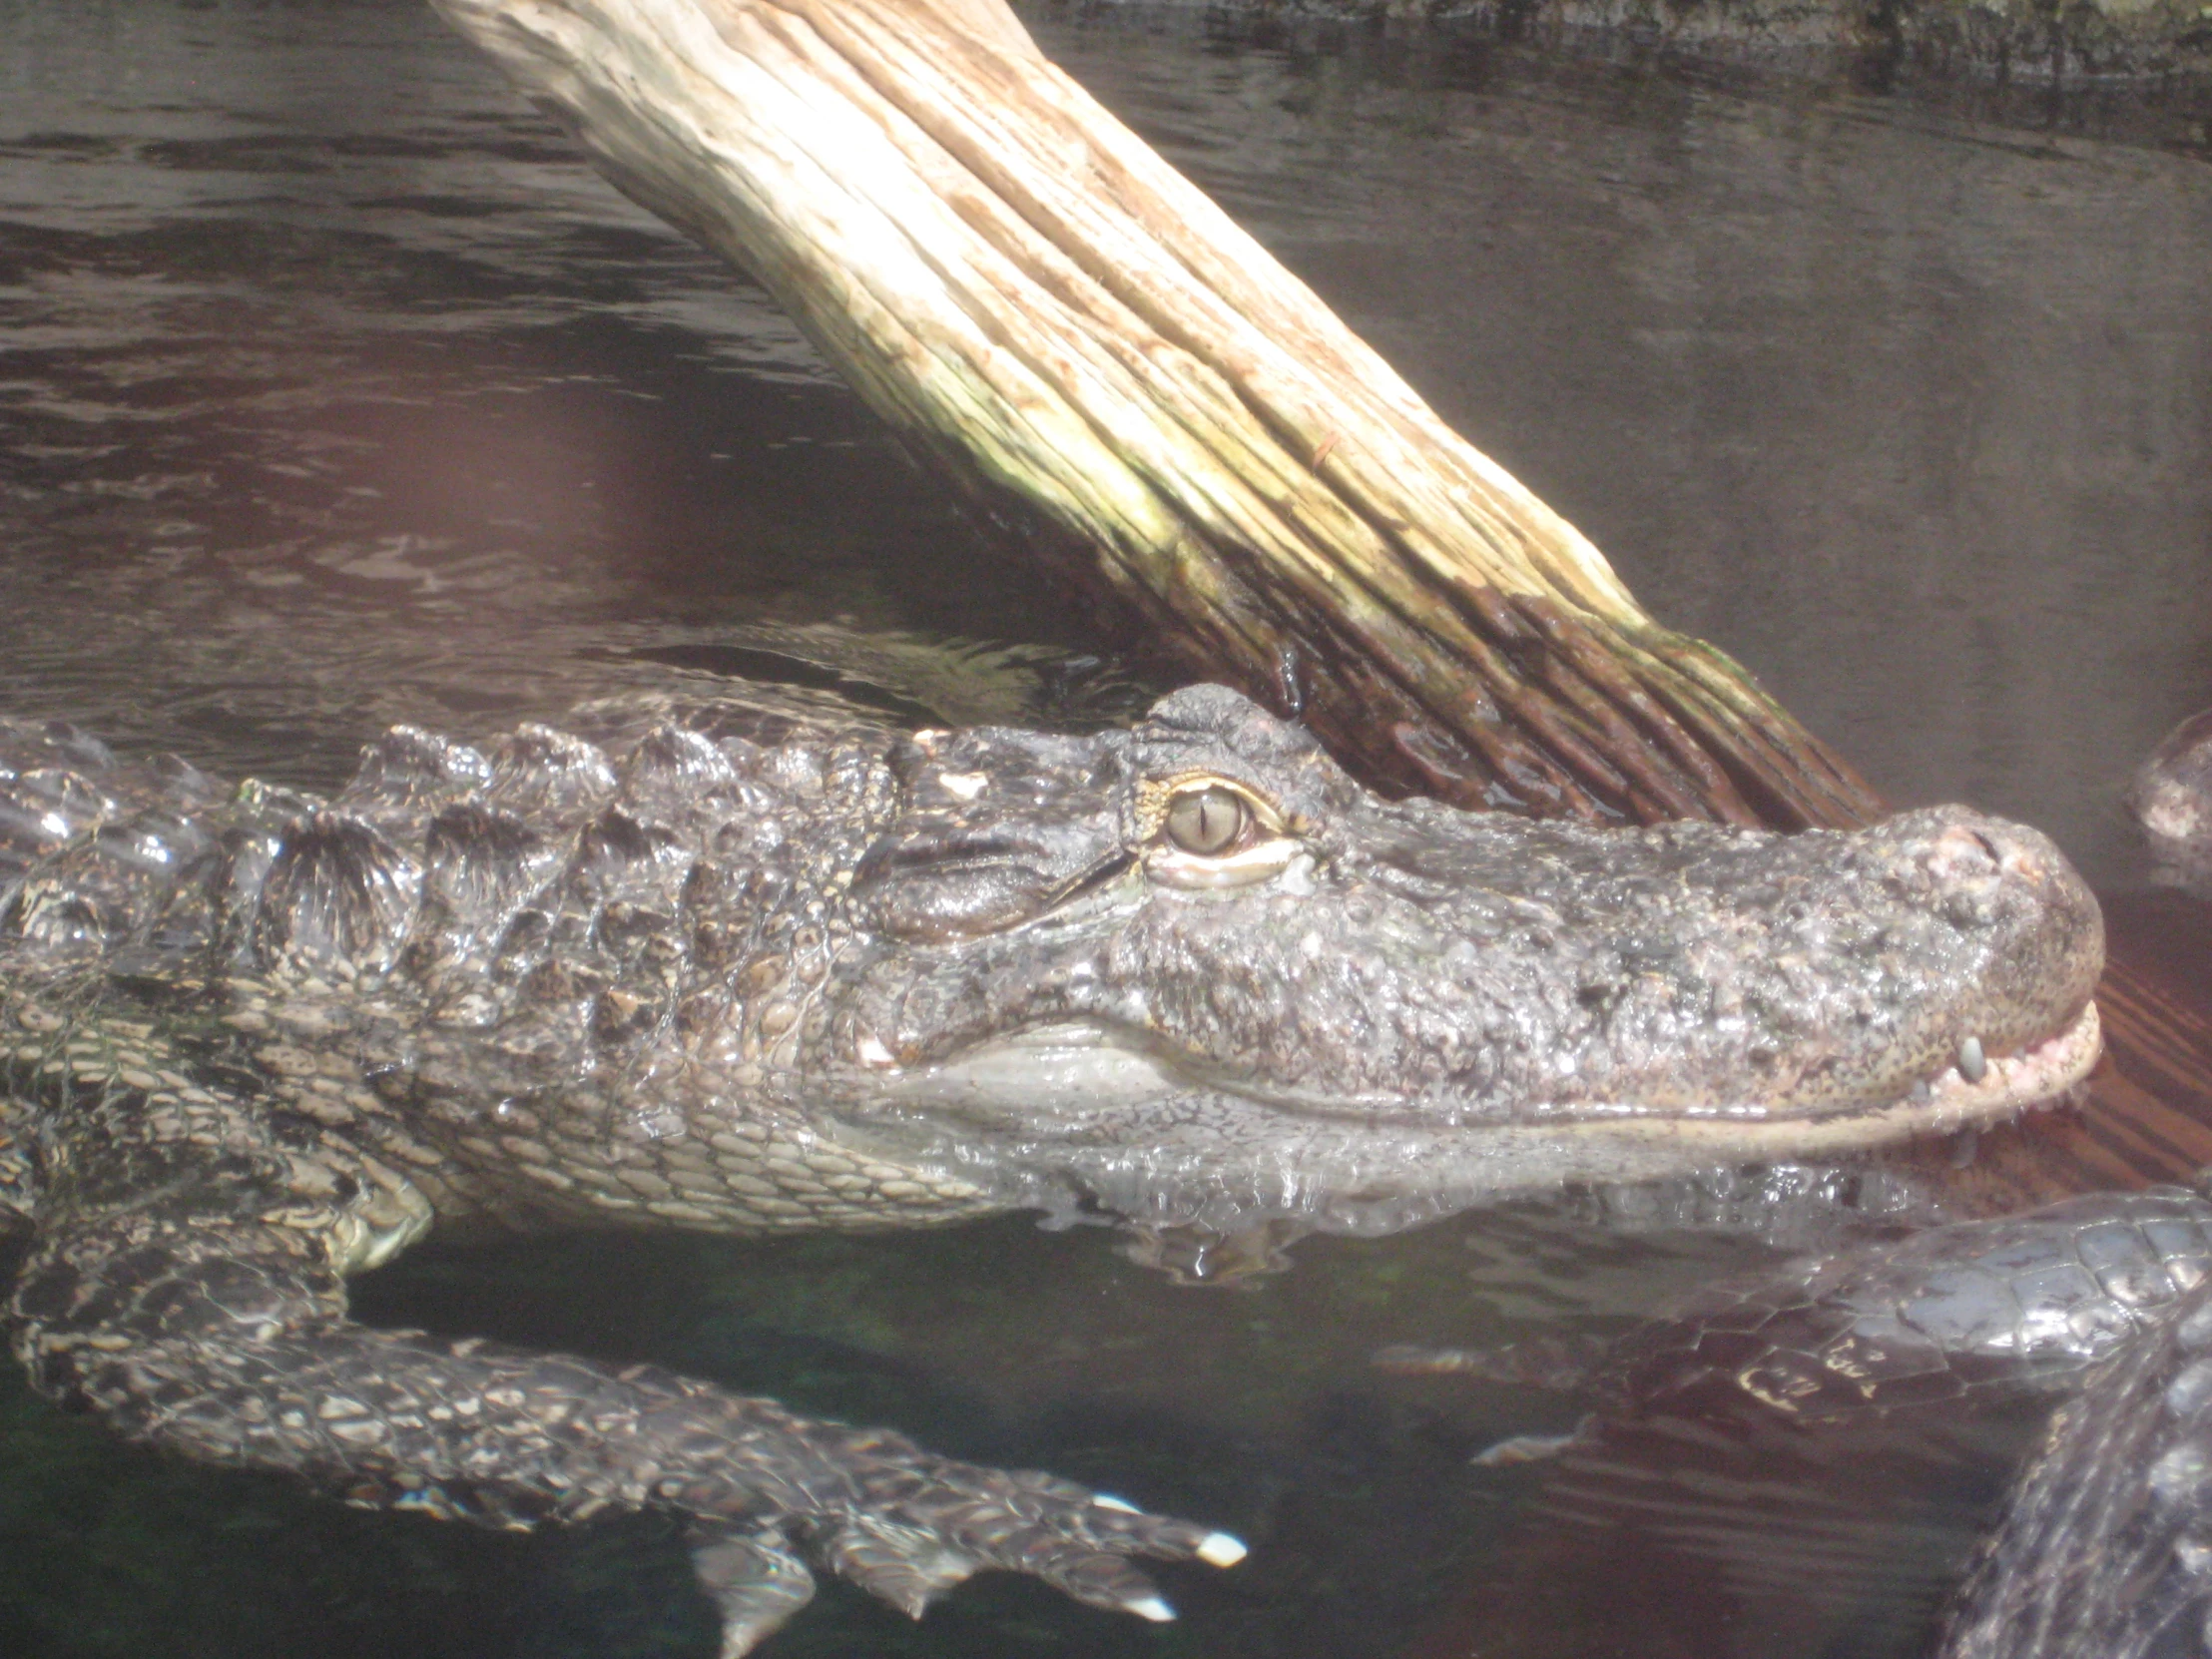 an alligator sitting in the water in a lake